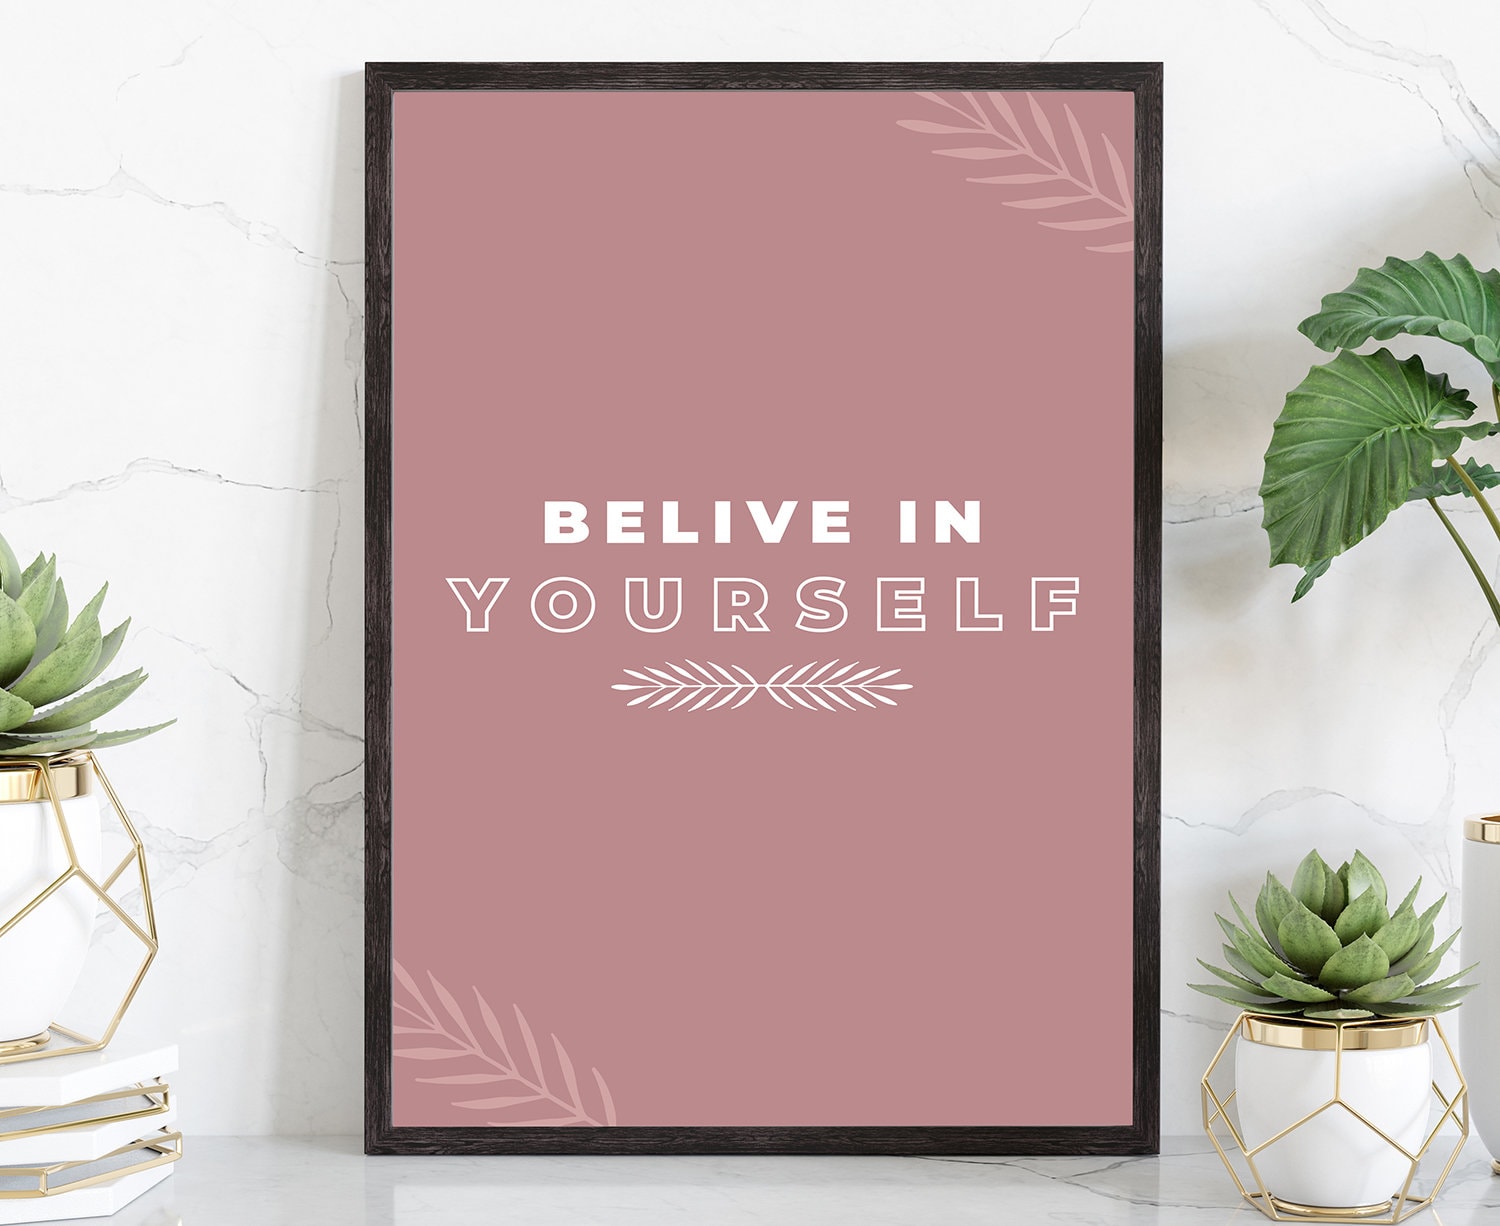 Believe in Yourself, Poster Print, Modern Poster prints, Art Prints for Homes, Dorm Rooms wall art, Office room wall art, Quote poster print